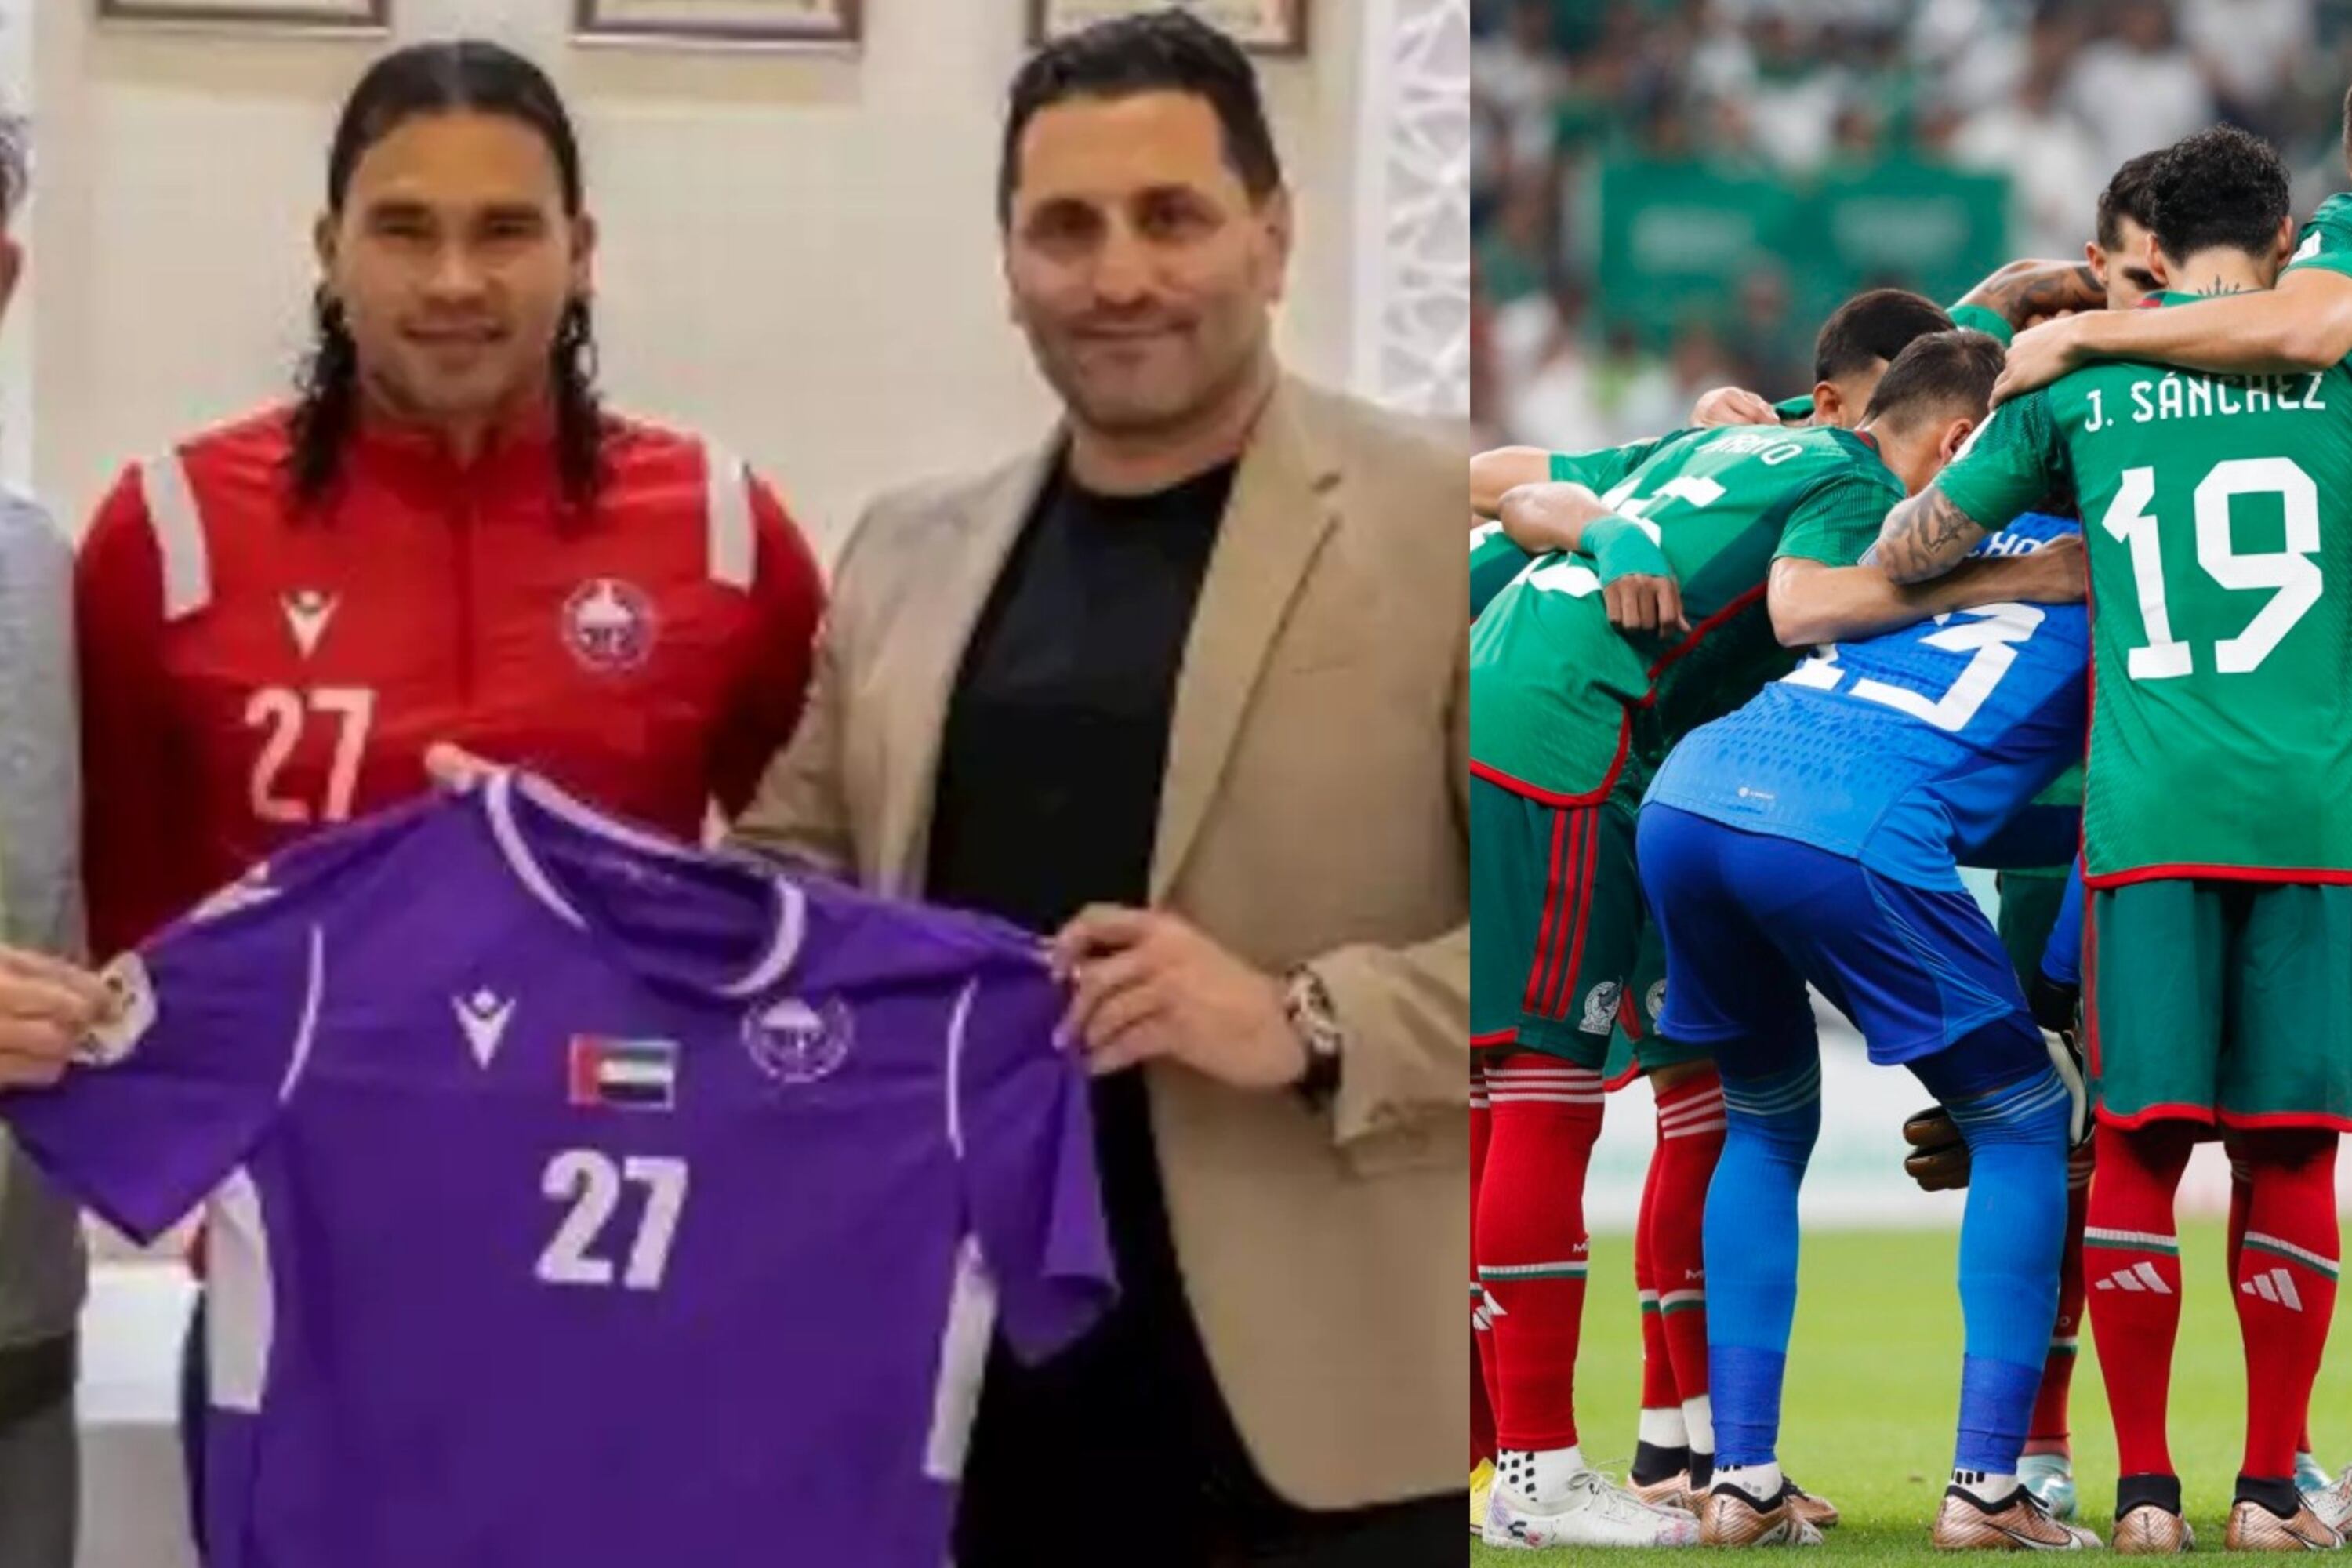 The second Mexican player to join Gullit Peña's club at the Emirates